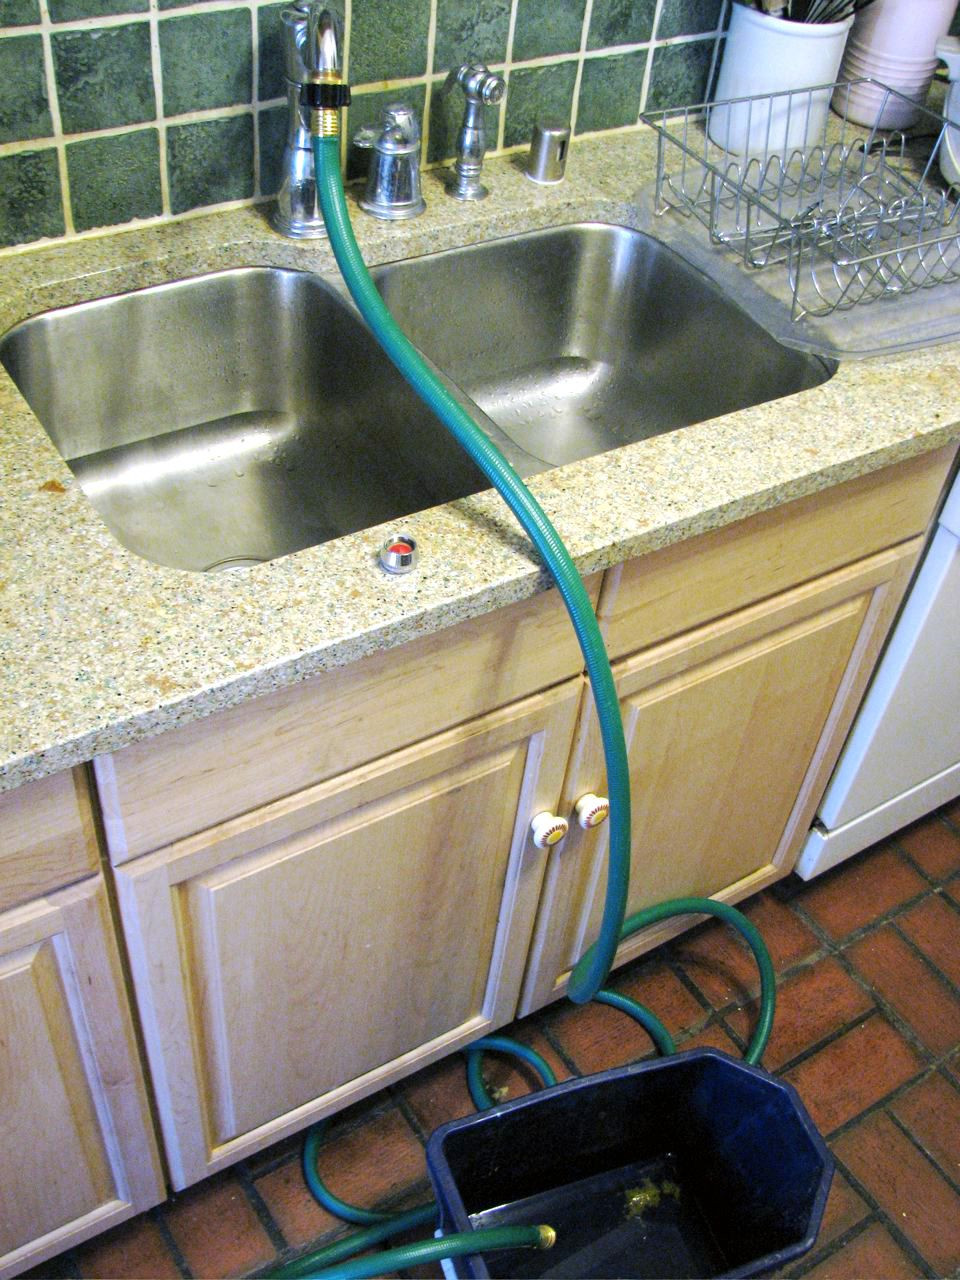 DIY Outdoor Sink Powered By A Water Hose
 Attach a Garden Hose to a Kitchen Faucet